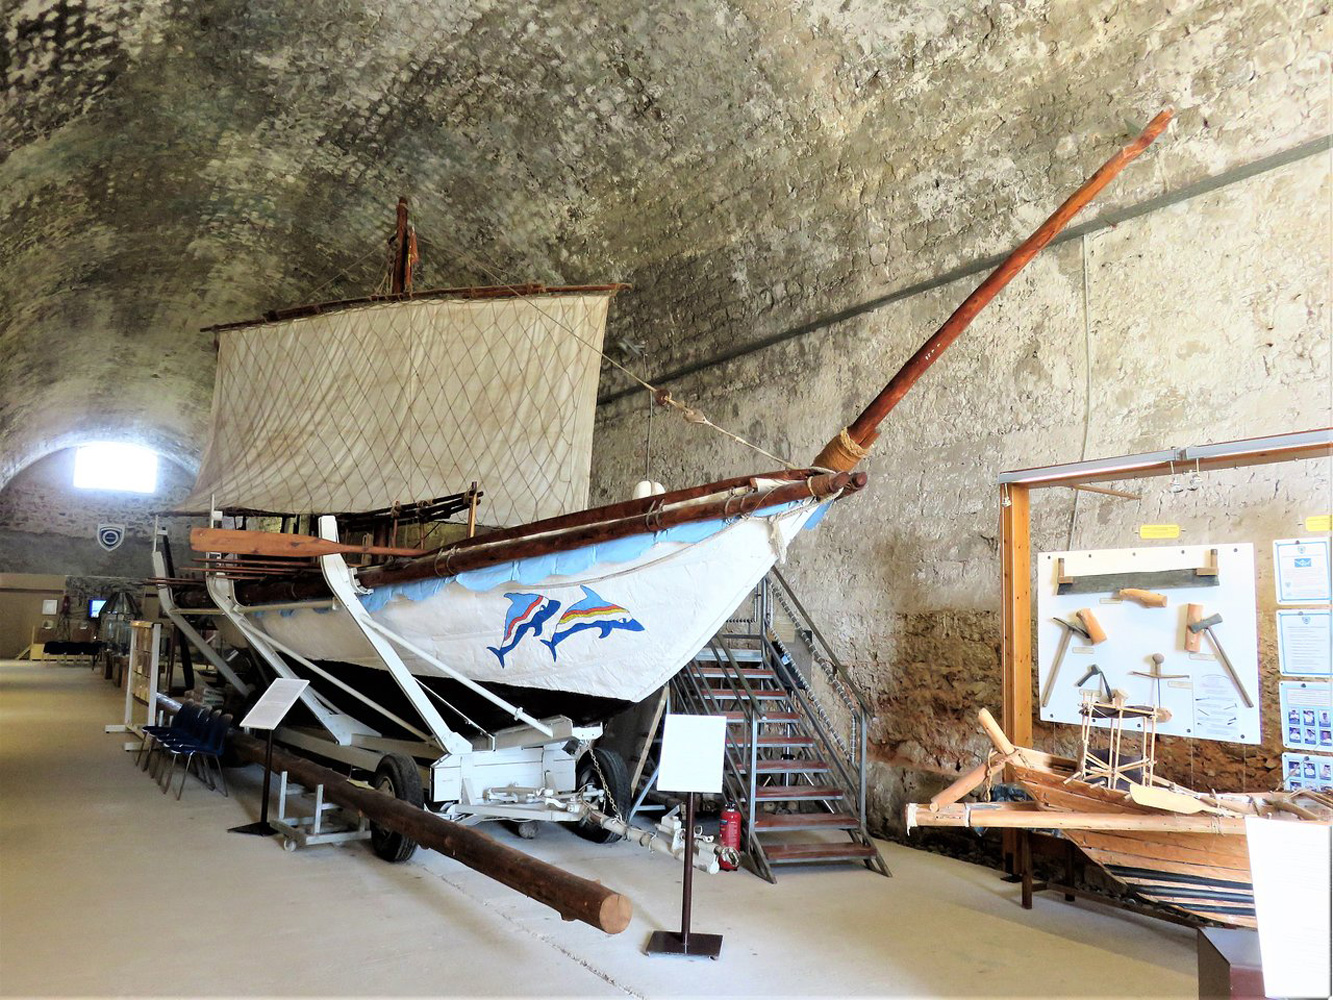 Display of the The Minoan Ship